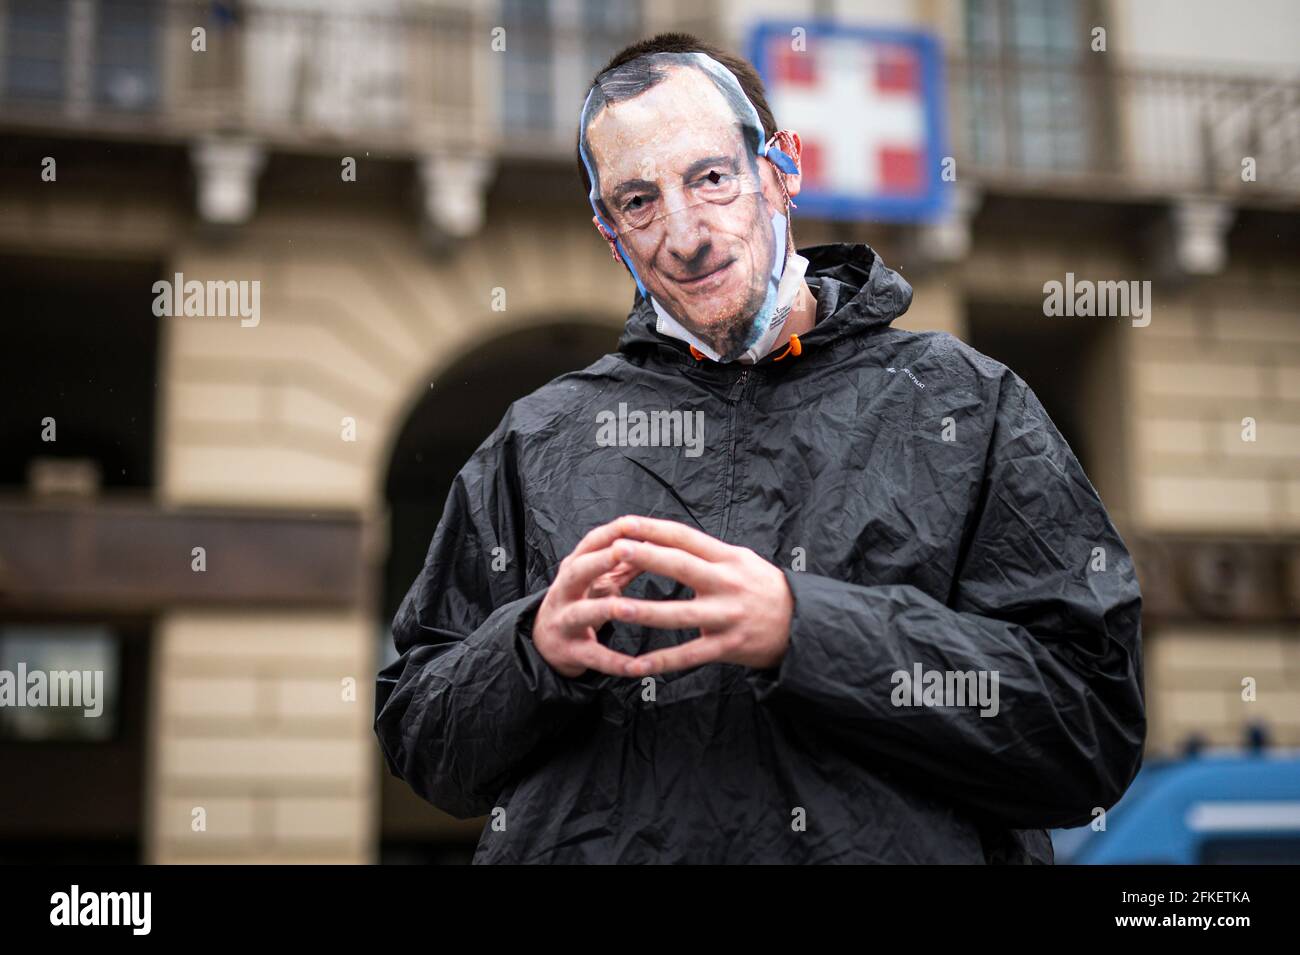 Turin, Italy. 01 May 2021. A demonstrator wearing a mask depicting Italian Prime Minister Mario Draghi gestures during a May Day rally (also known as International Workers' Day or Labour Day). May Day occurs every year on 1 May and it is used to mark the fight for workers' rights across the world . Credit: Nicolò Campo/Alamy Live News Stock Photo